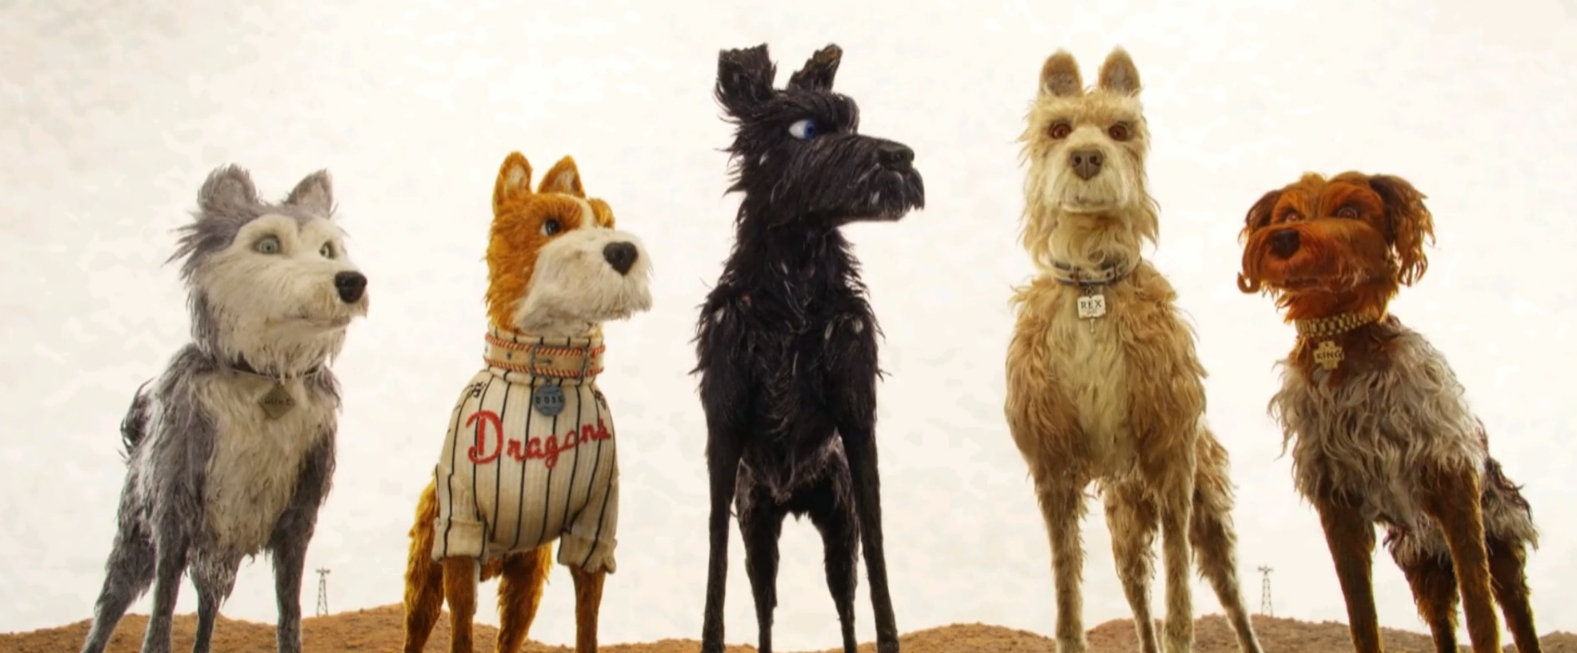 Isle of Dogs Movie Review